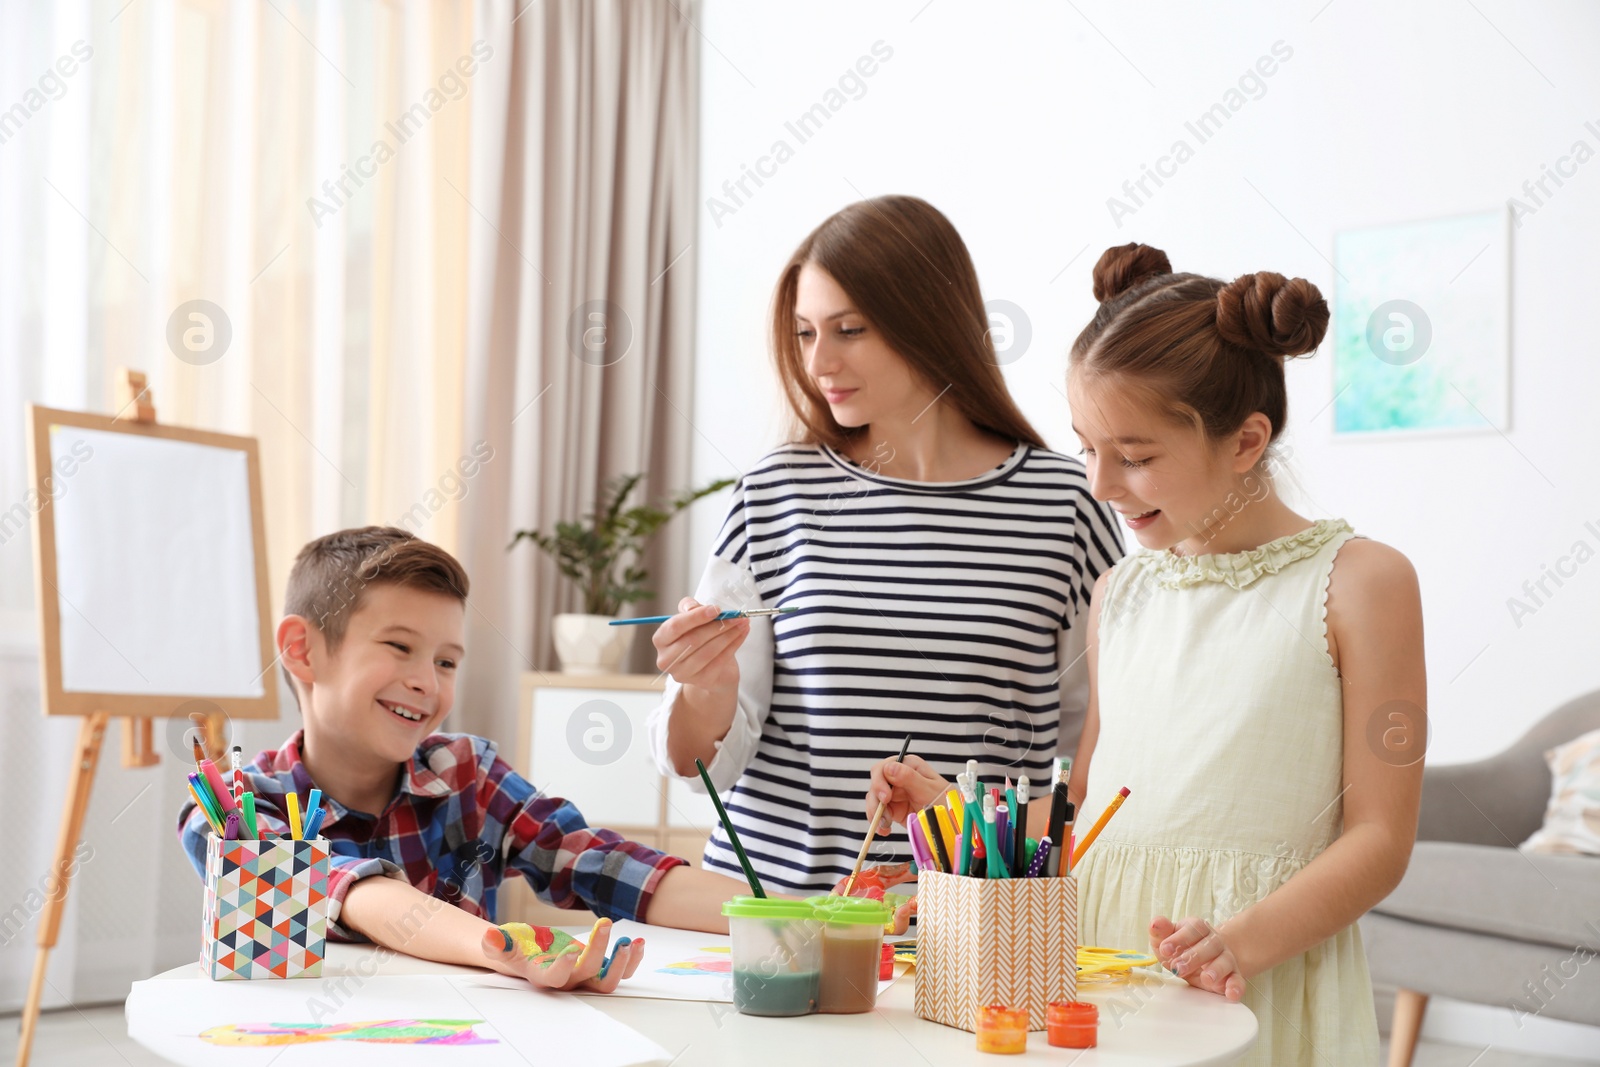 Photo of Young woman and children having fun with paints at table indoors